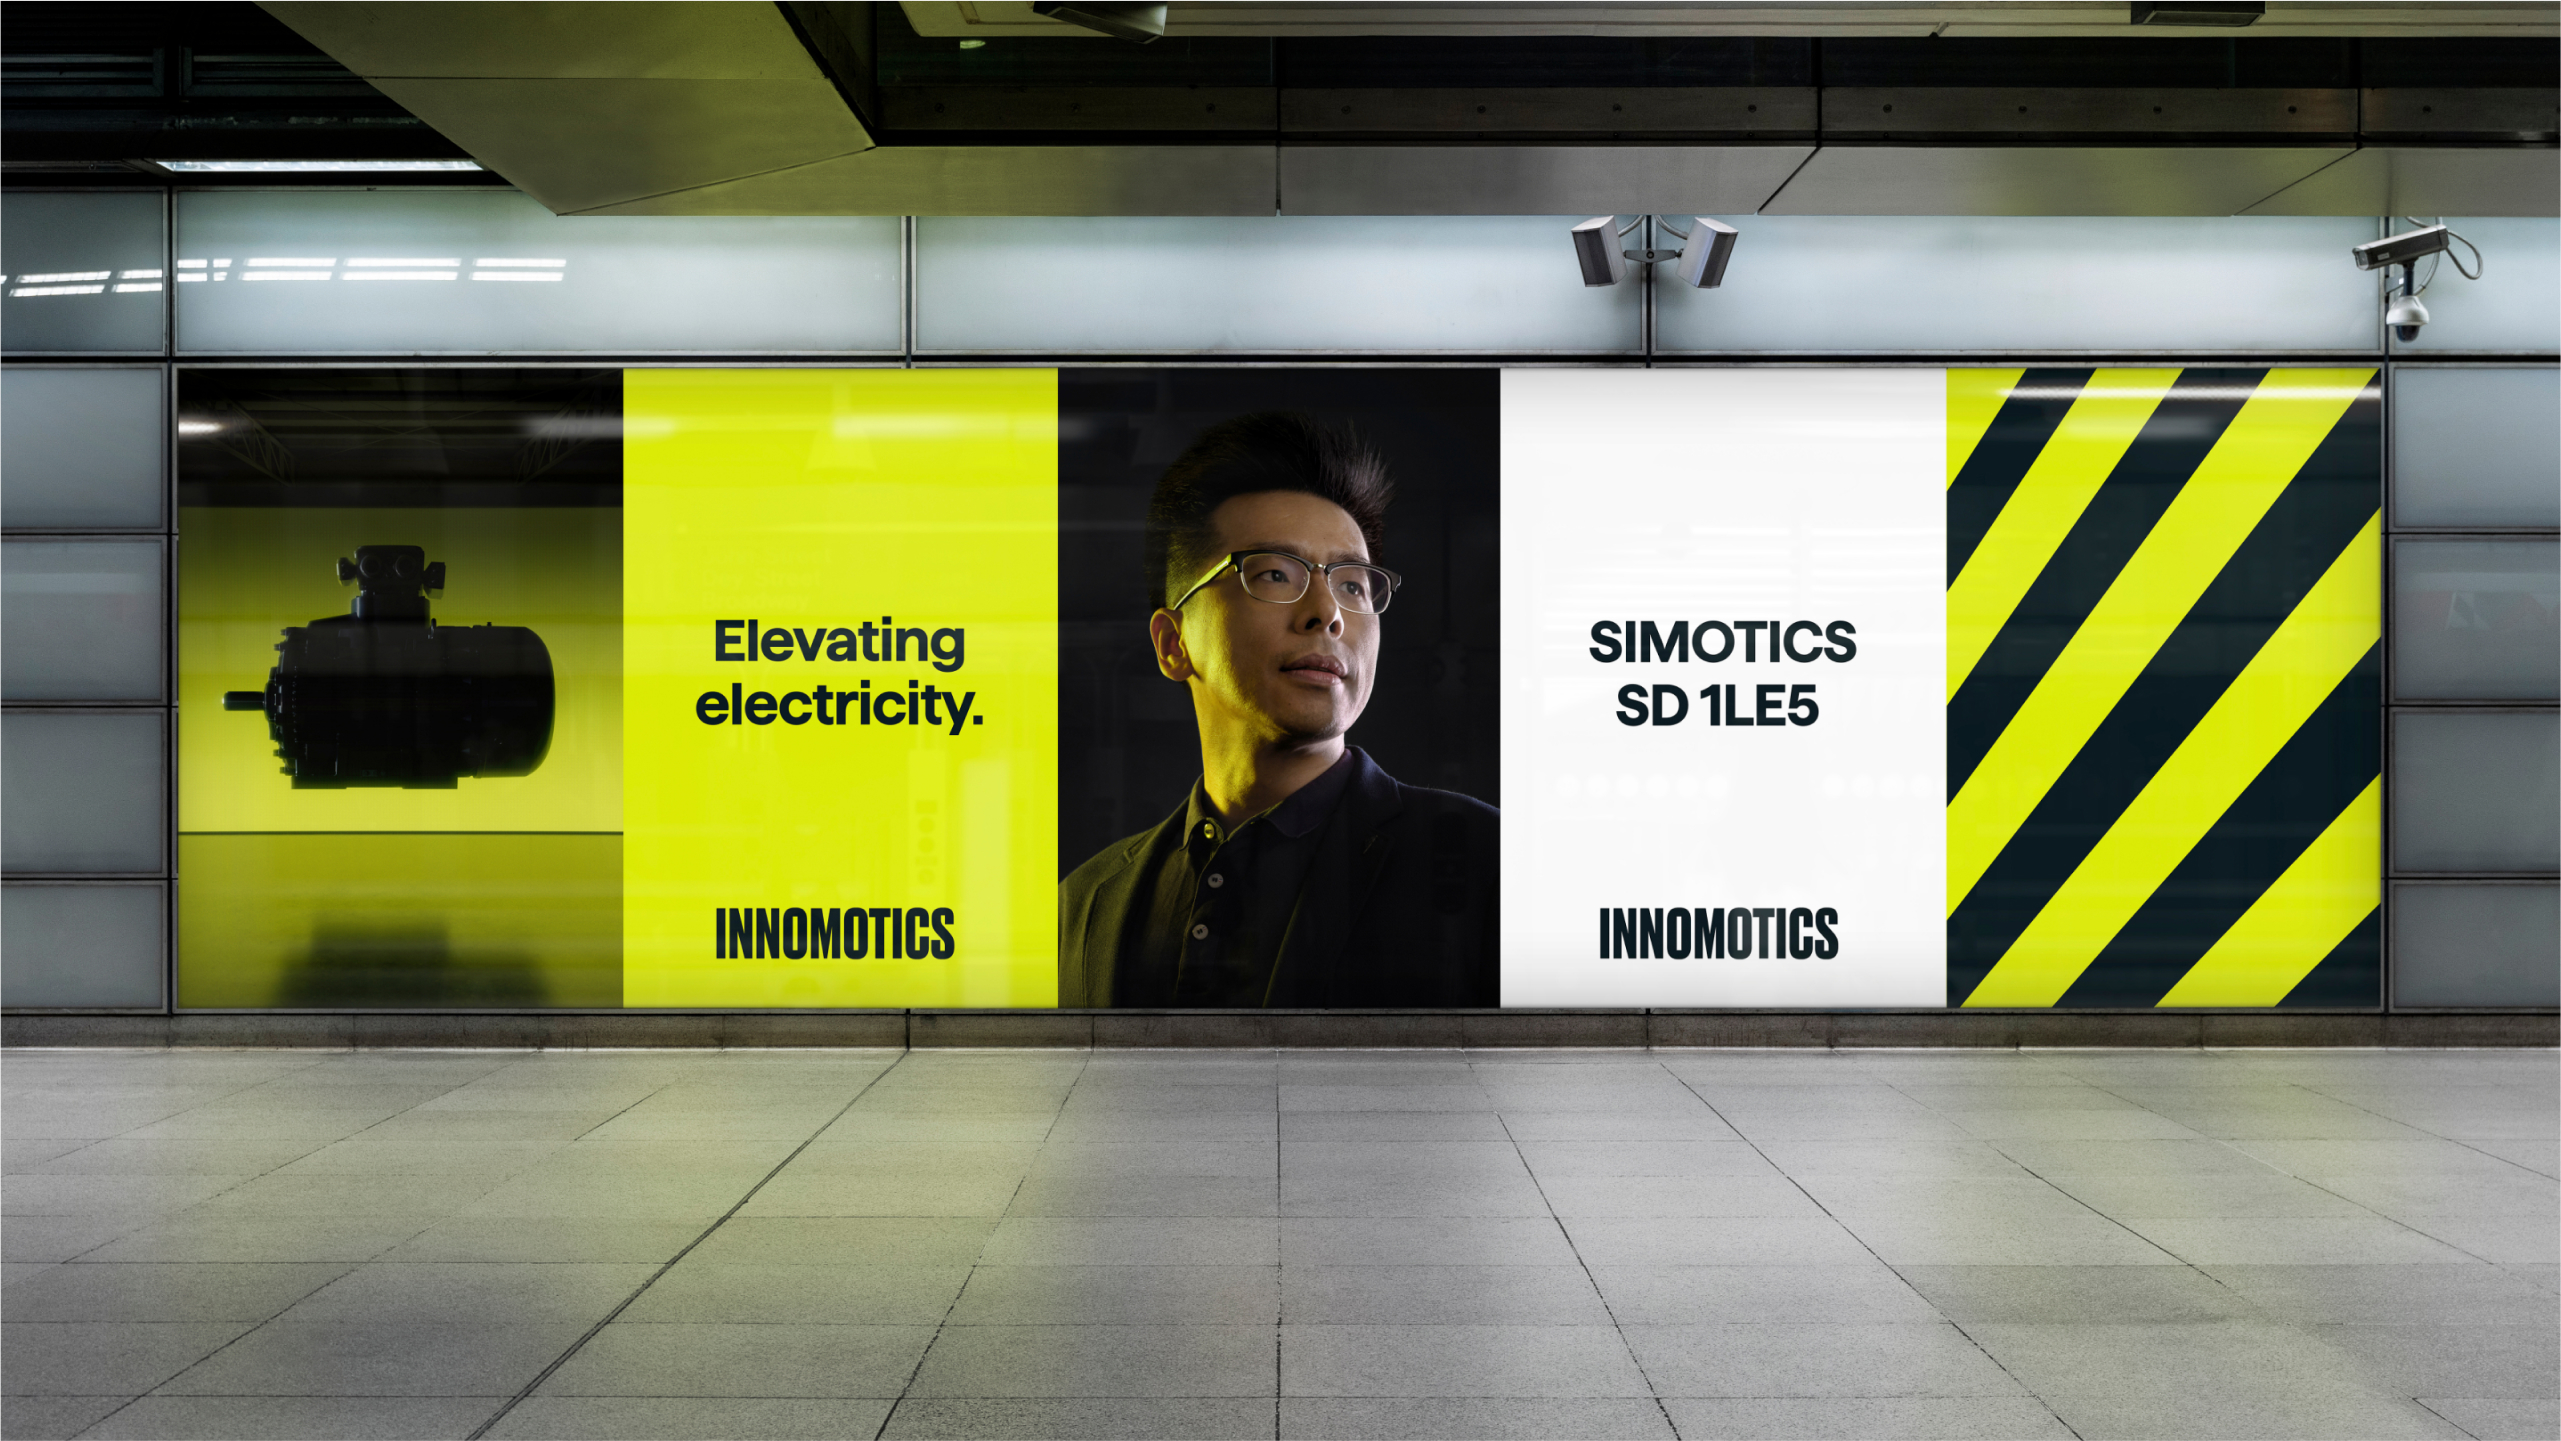 Innomotics – It's time for new reliable motion